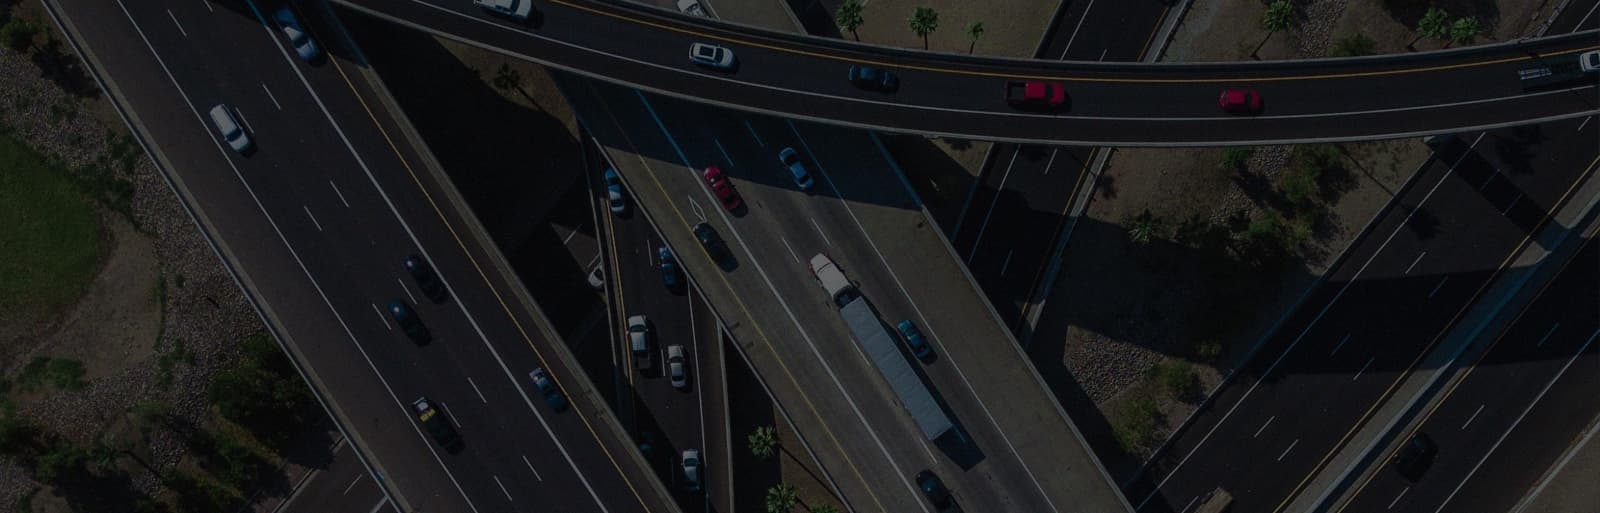 arial view of major highways overlapping